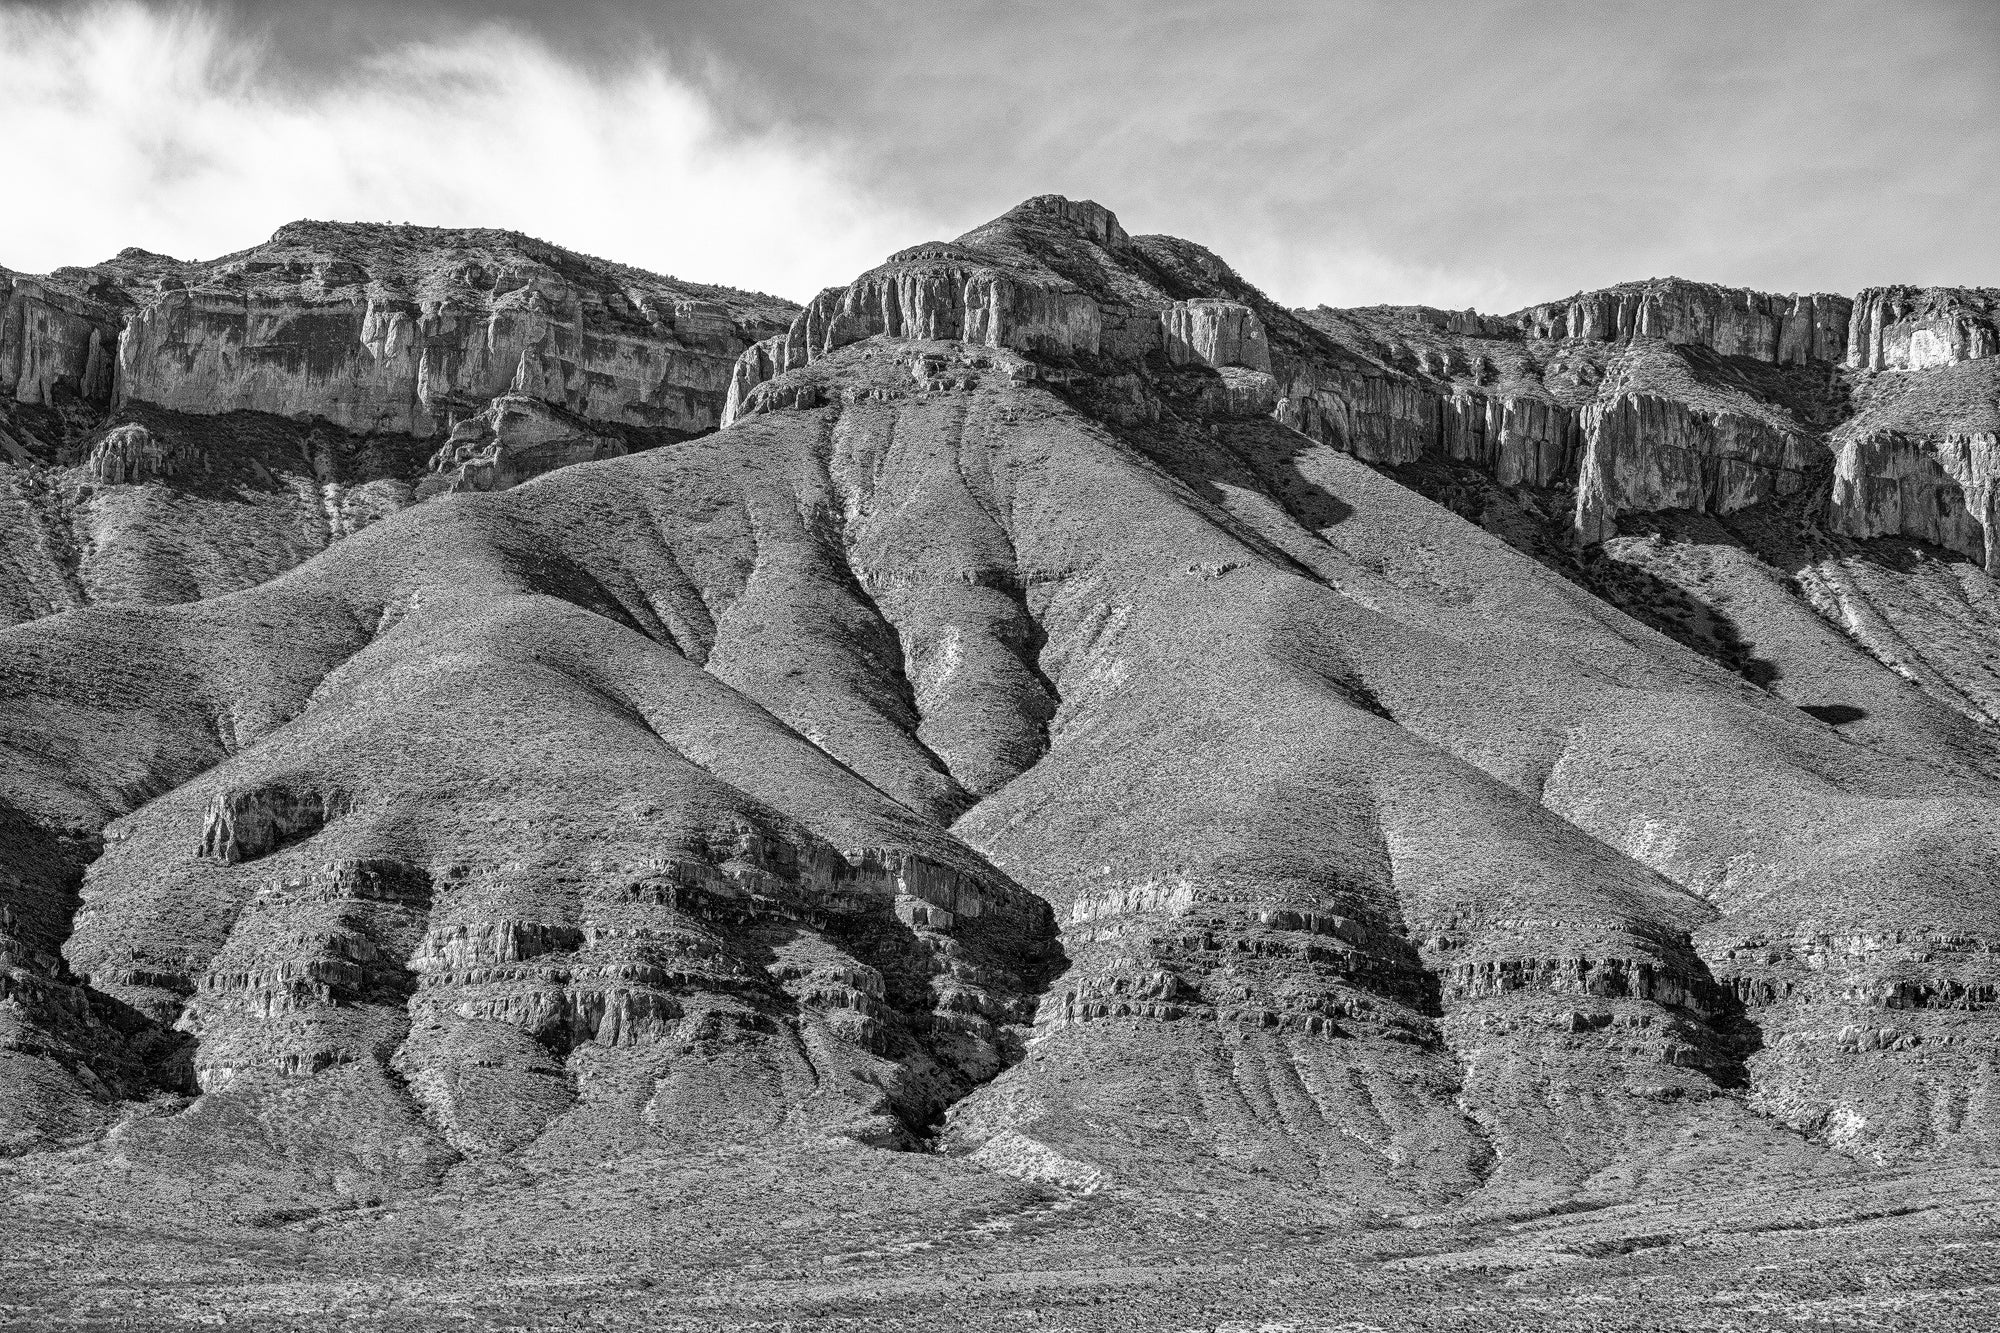 The Rugged West - Black and White Landscape Photograph by Keith Dotson. Buy a fine art print.